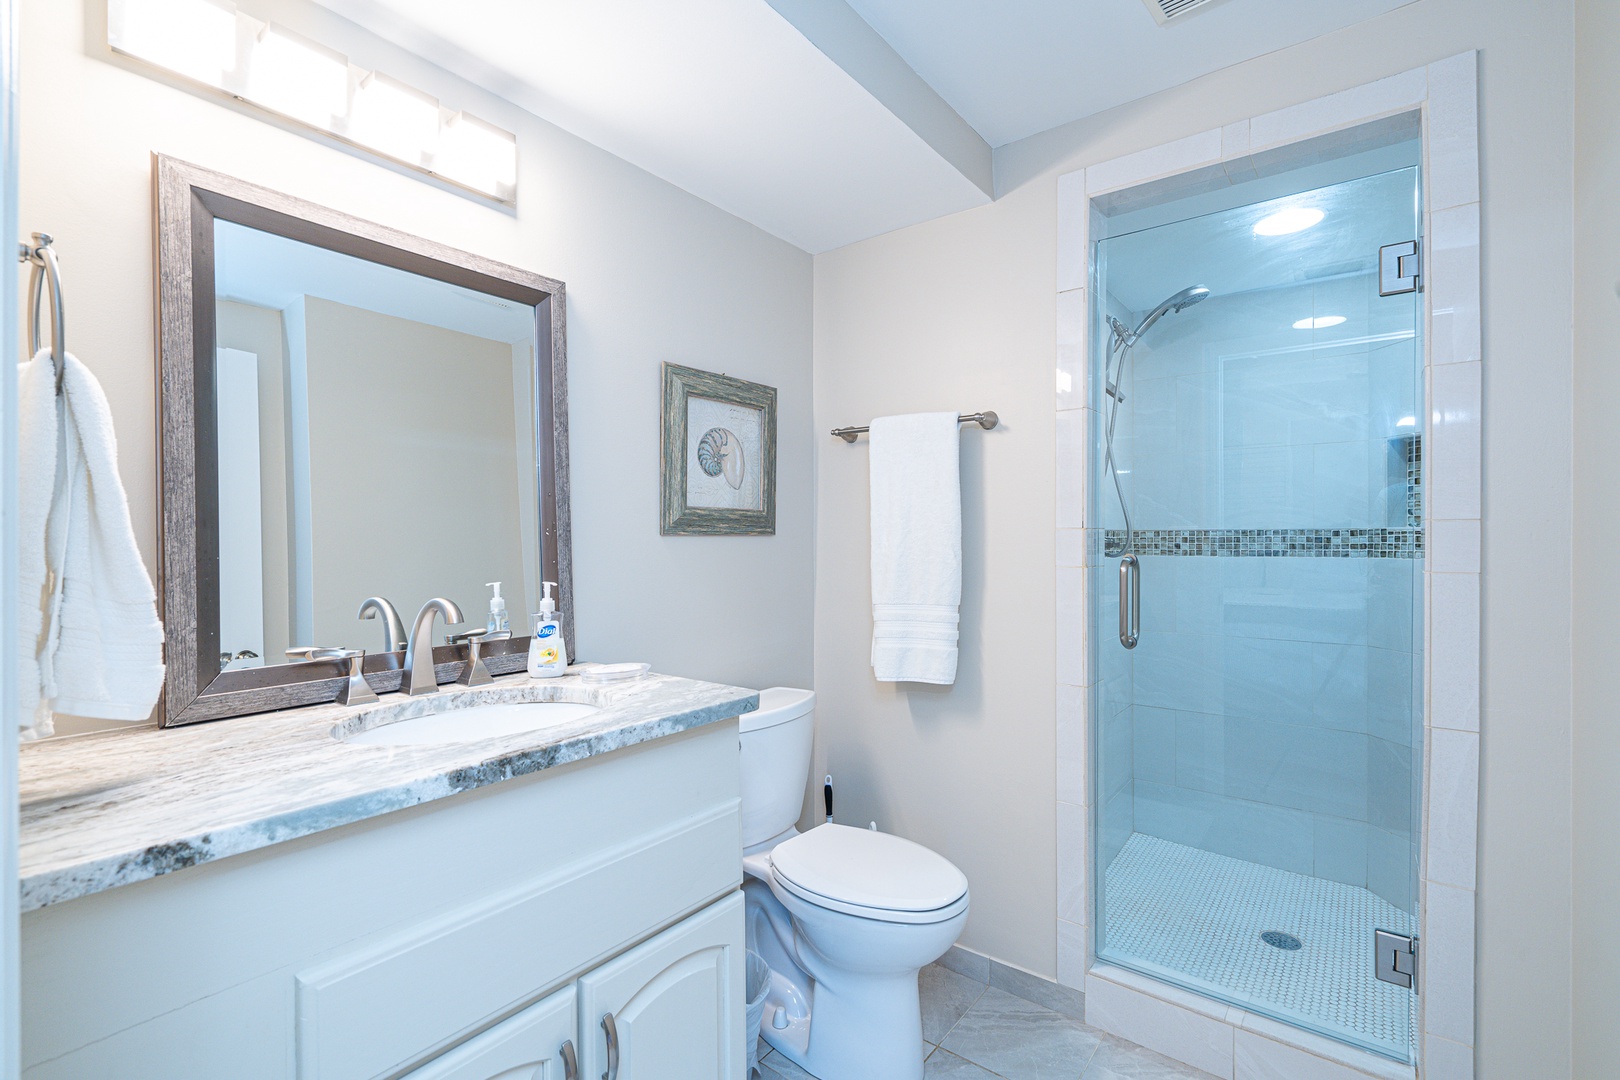 The queen ensuite includes a single vanity & glass shower